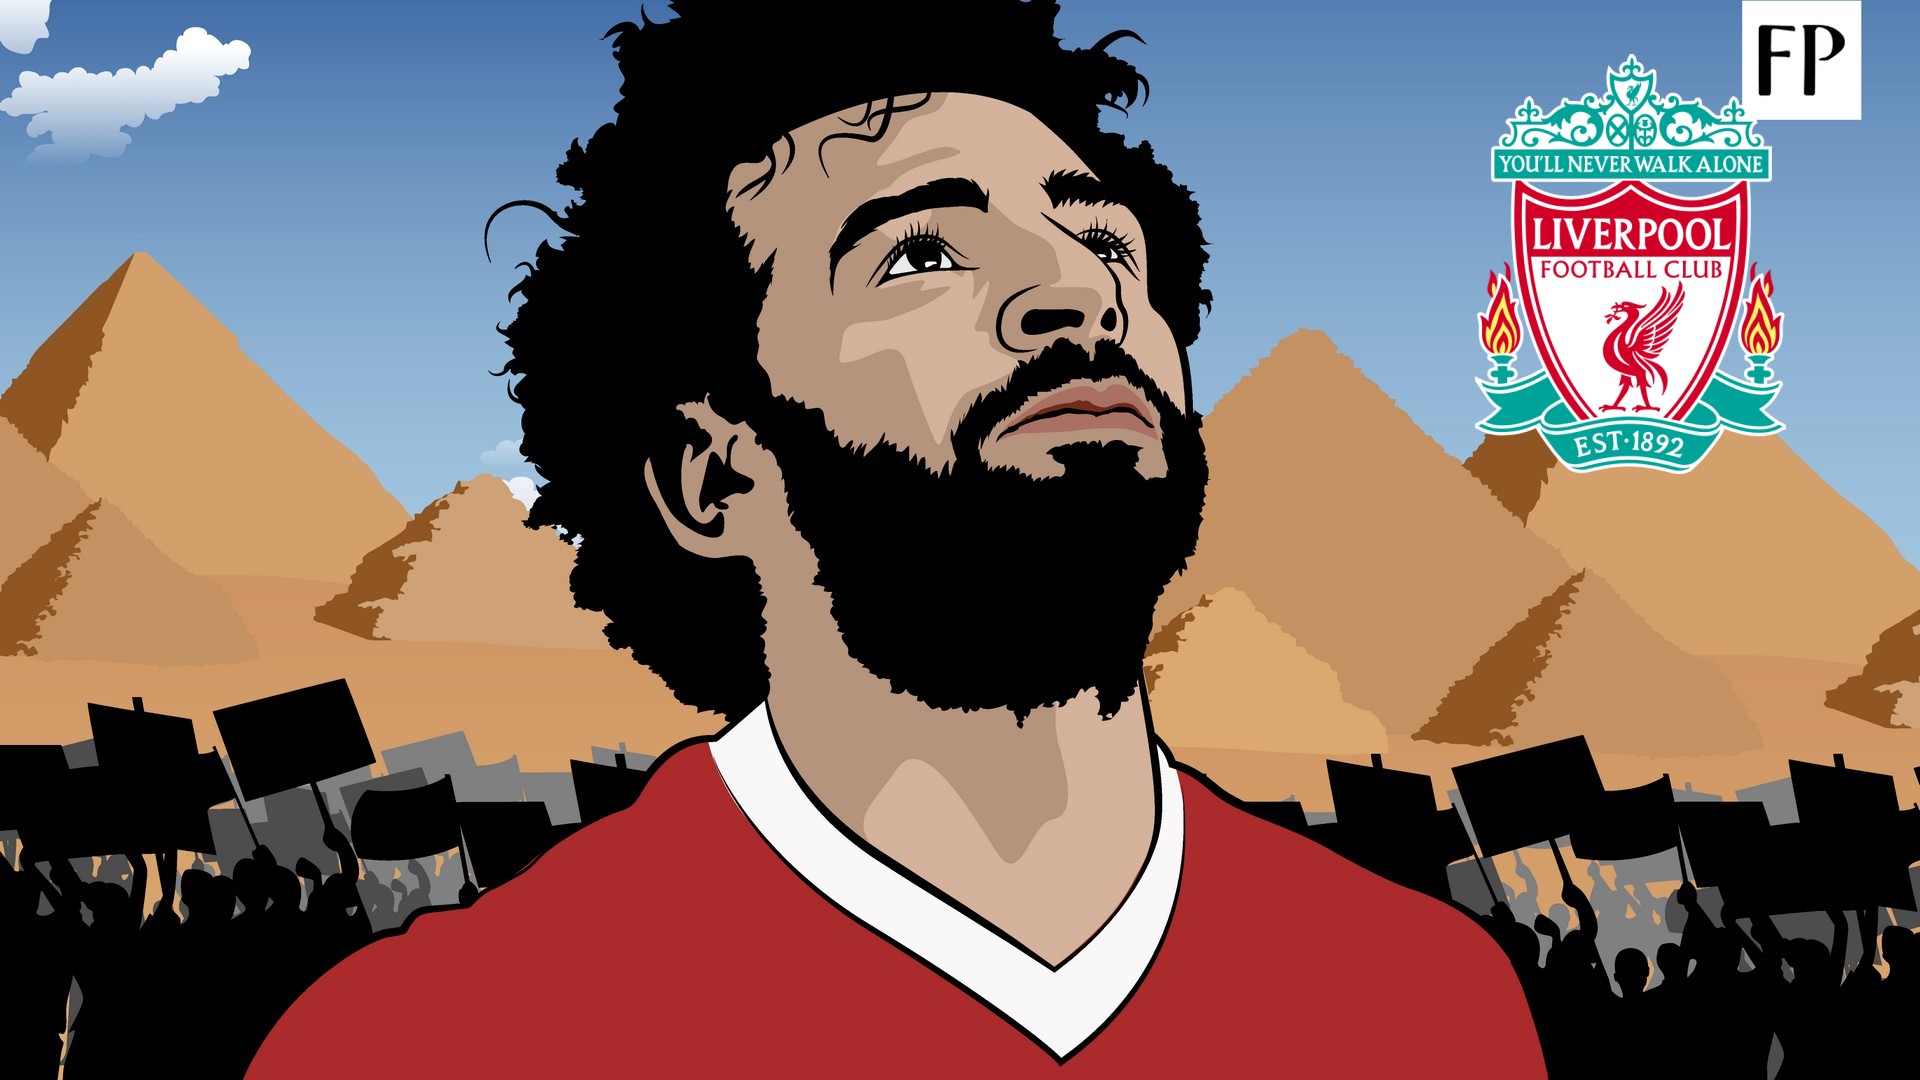 Computer Wallpapers Mohamed Salah Liverpool with image resolution 1920x1080 pixel. You can use this wallpaper as background for your desktop Computer Screensavers, Android or iPhone smartphones